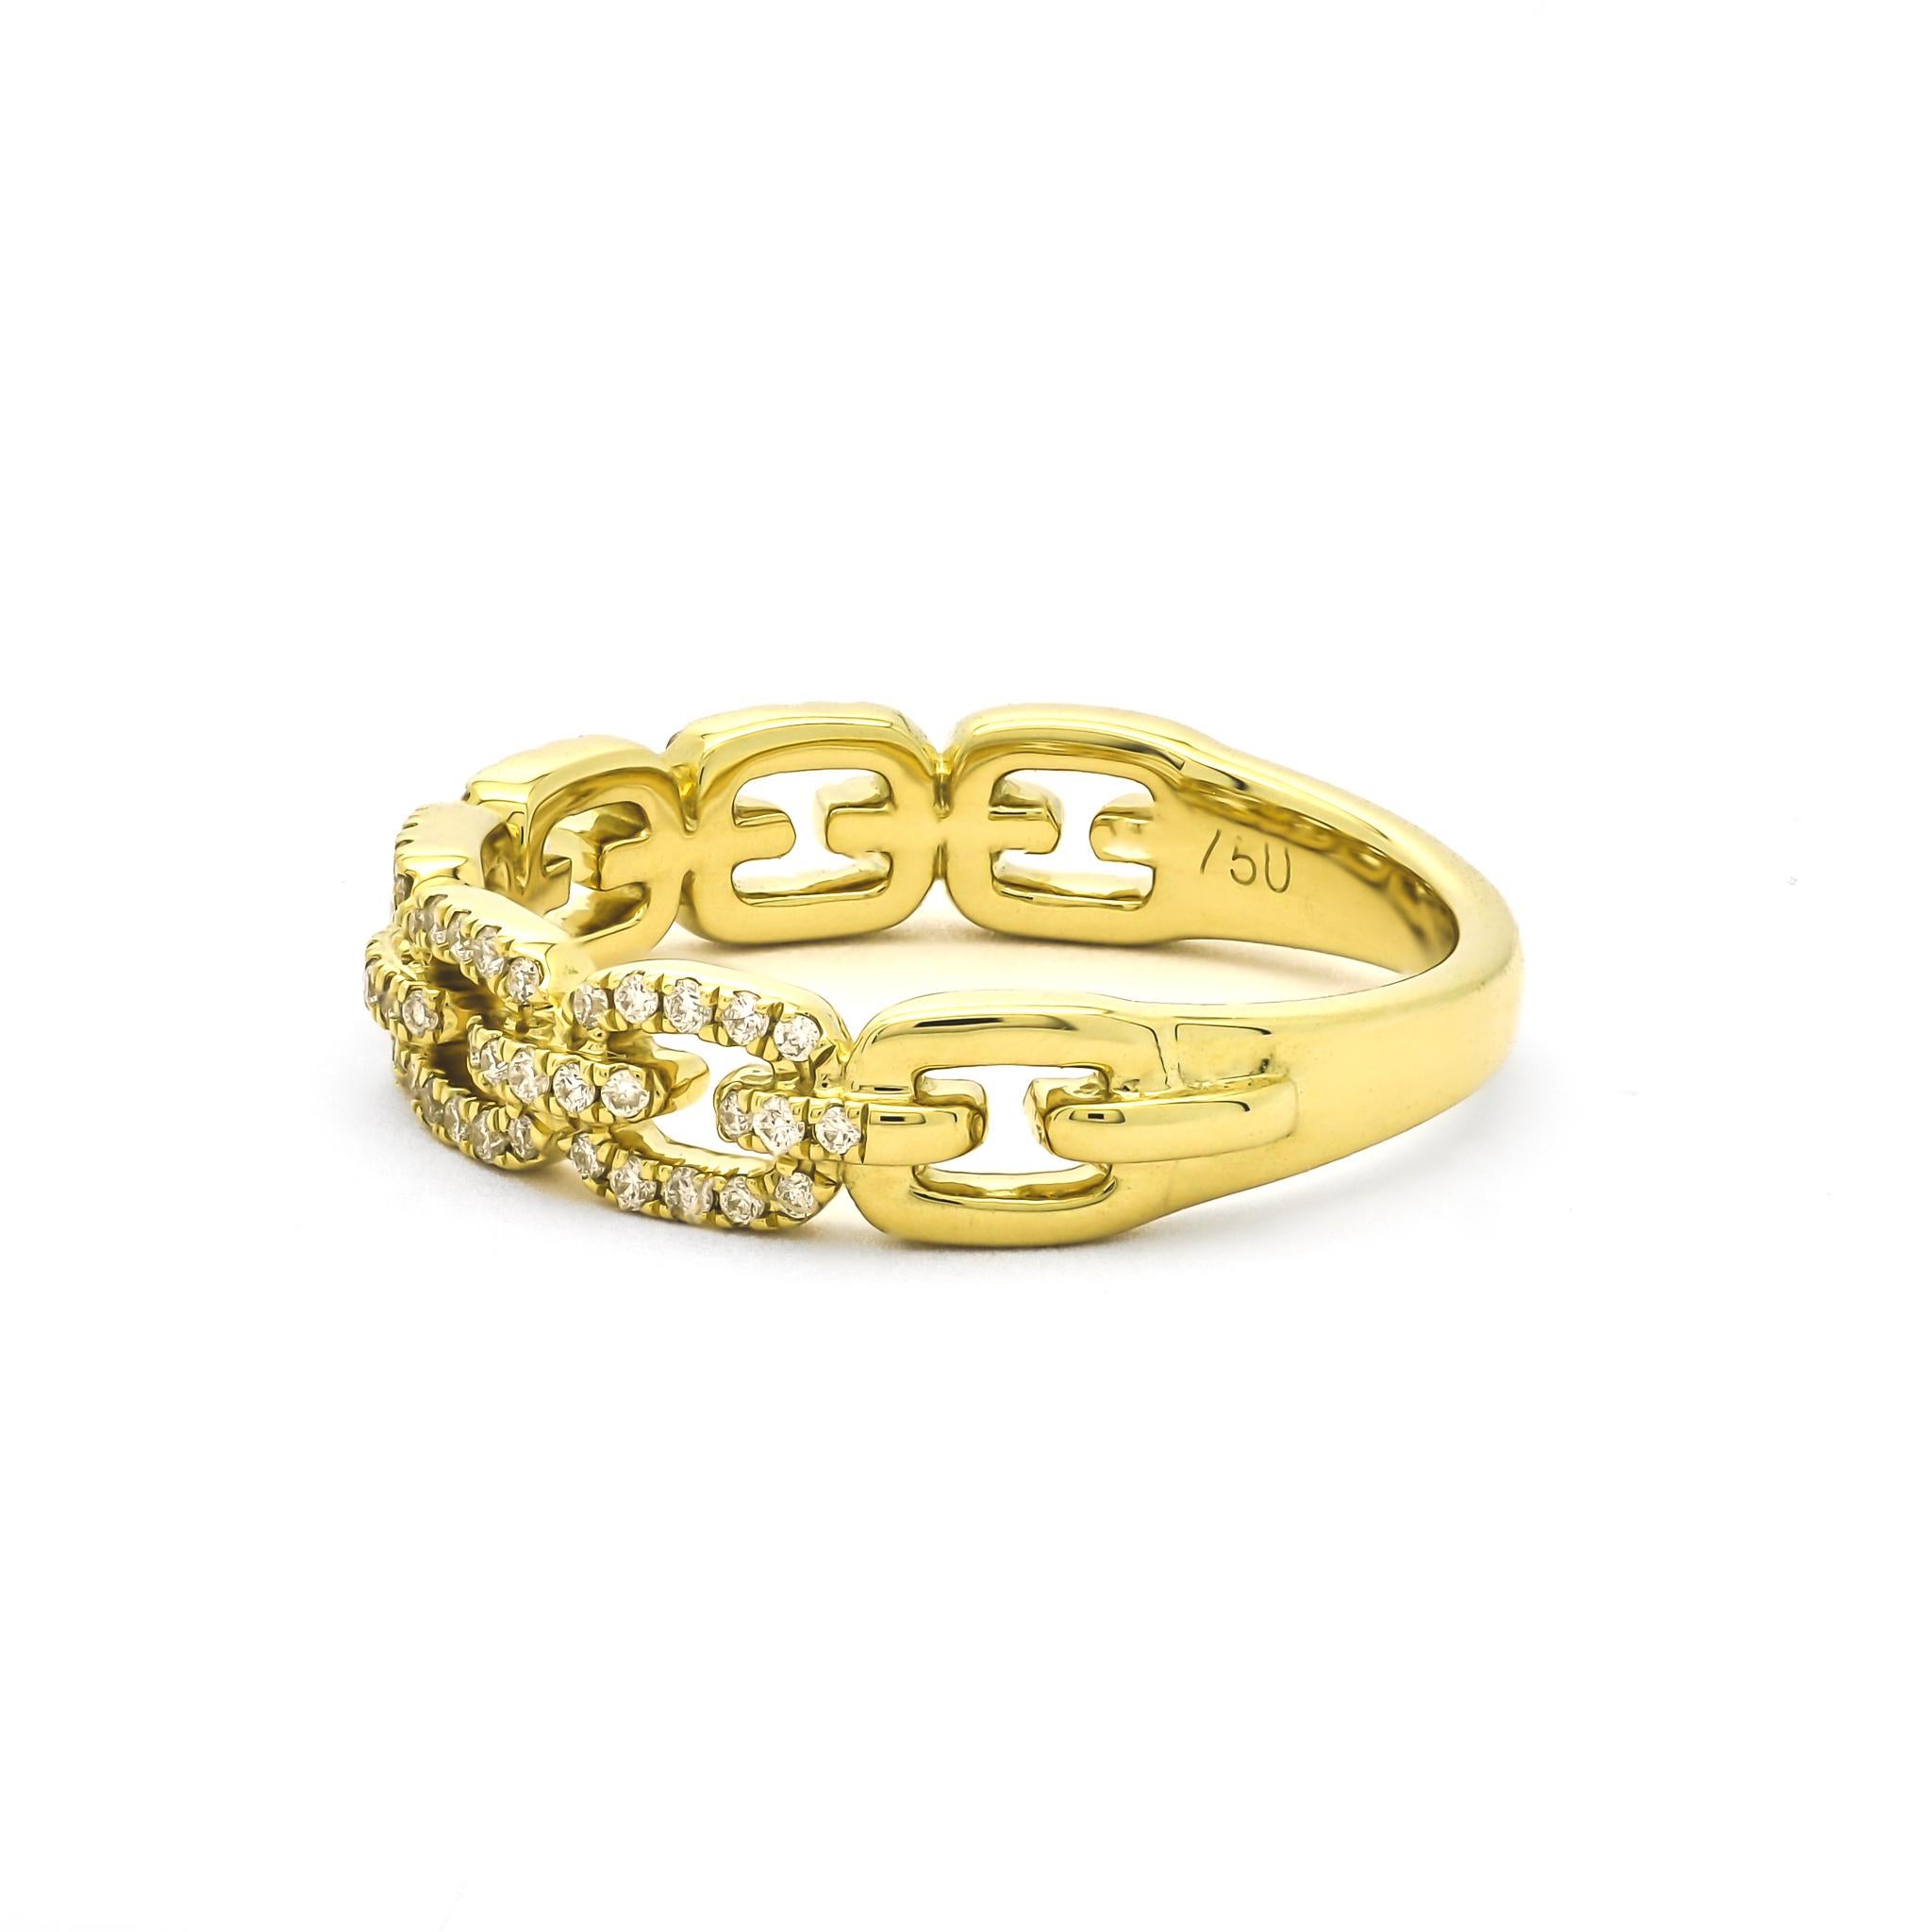 Immerse yourself in the world of contemporary elegance with the Natural Diamond 0.28CT 18Karat Yellow Gold Chain Link Ring. This remarkable piece of jewelry seamlessly marries timeless charm with modern design sensibilities. 

Forged from radiant